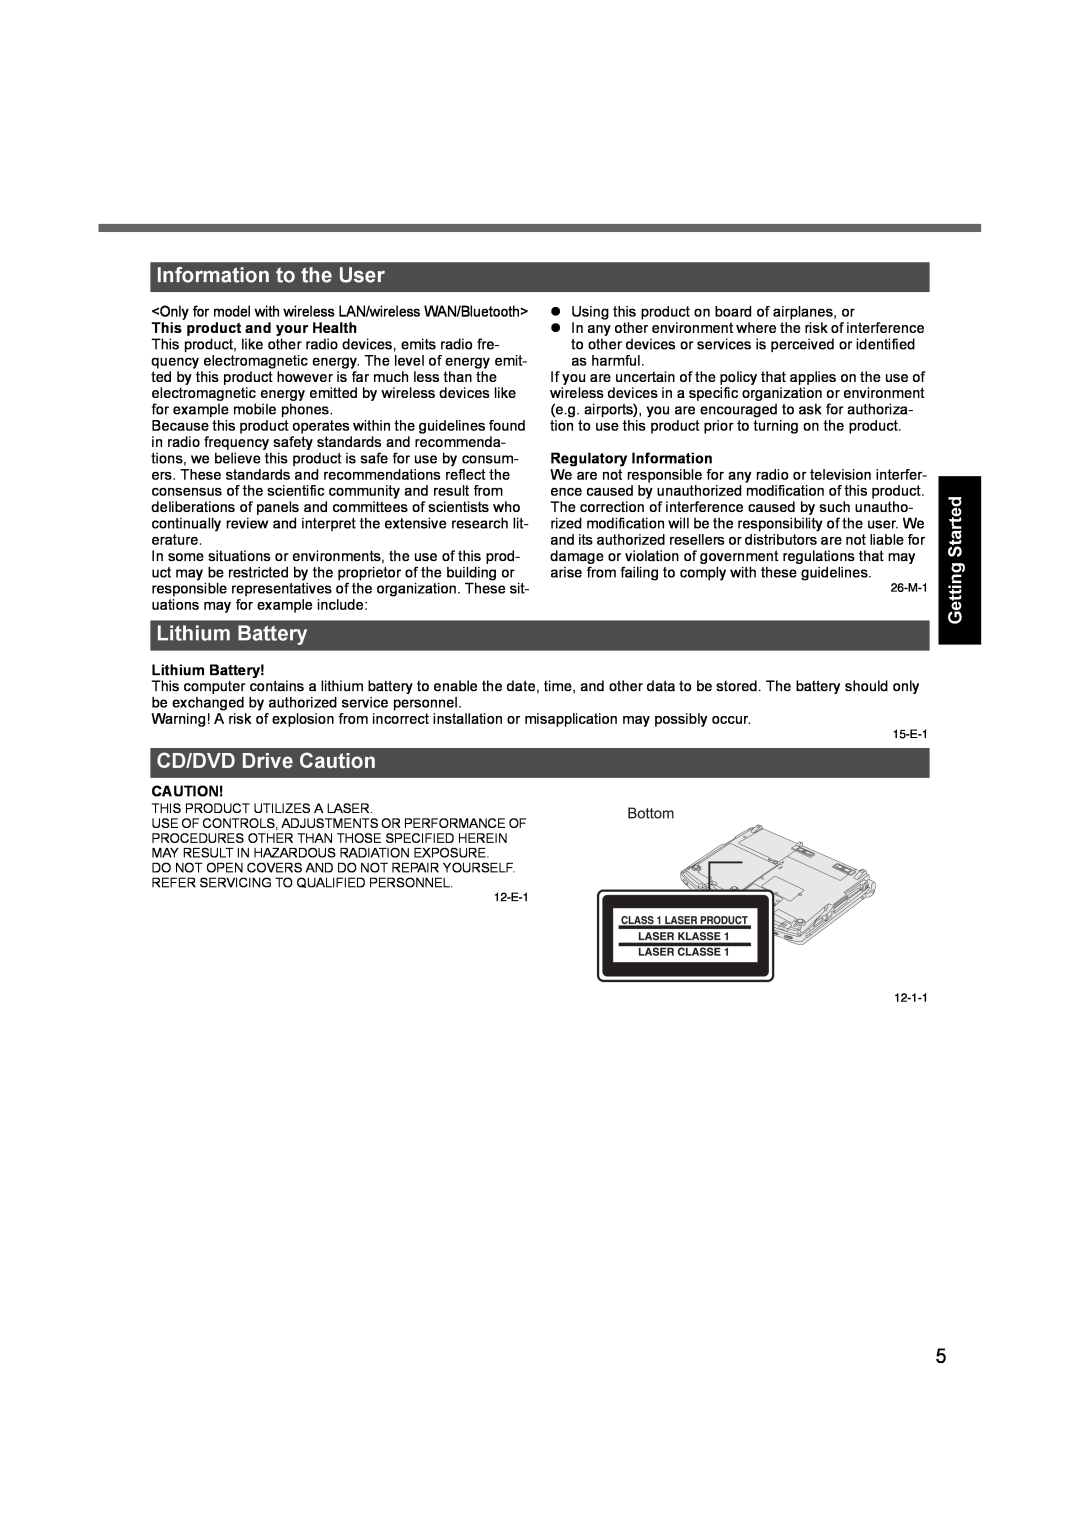 Panasonic CF-F9 Information to the User, Lithium Battery, CD/DVD Drive Caution, Getting Started, Regulatory Information 